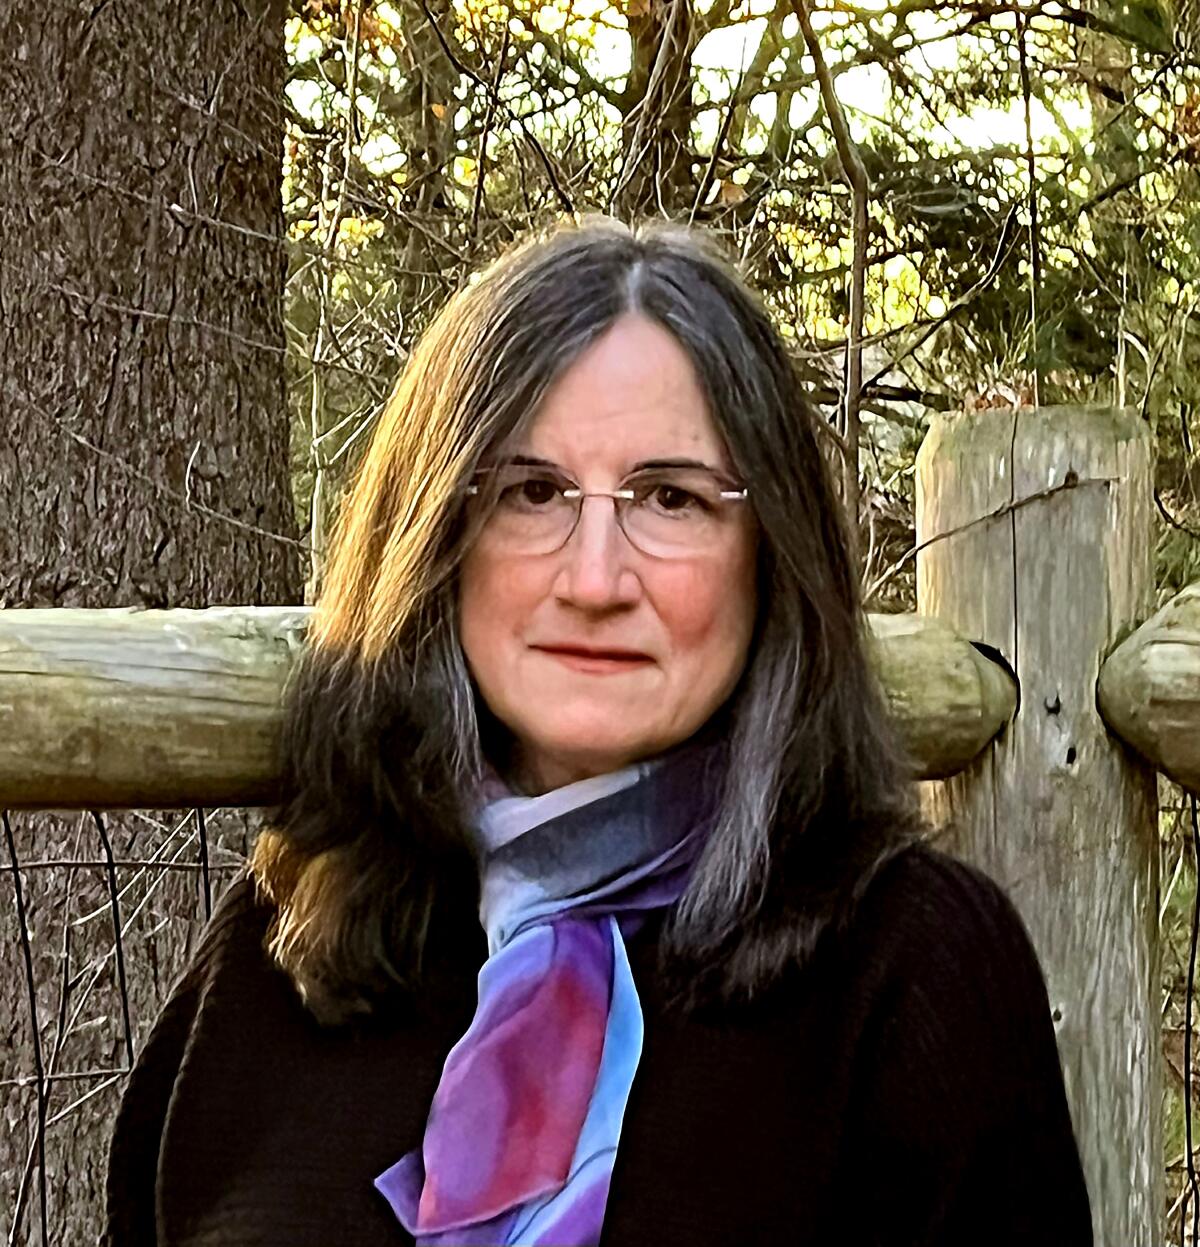 A woman wearing glasses and a colorful scarf looks at the camera, outside in a woodsy area.